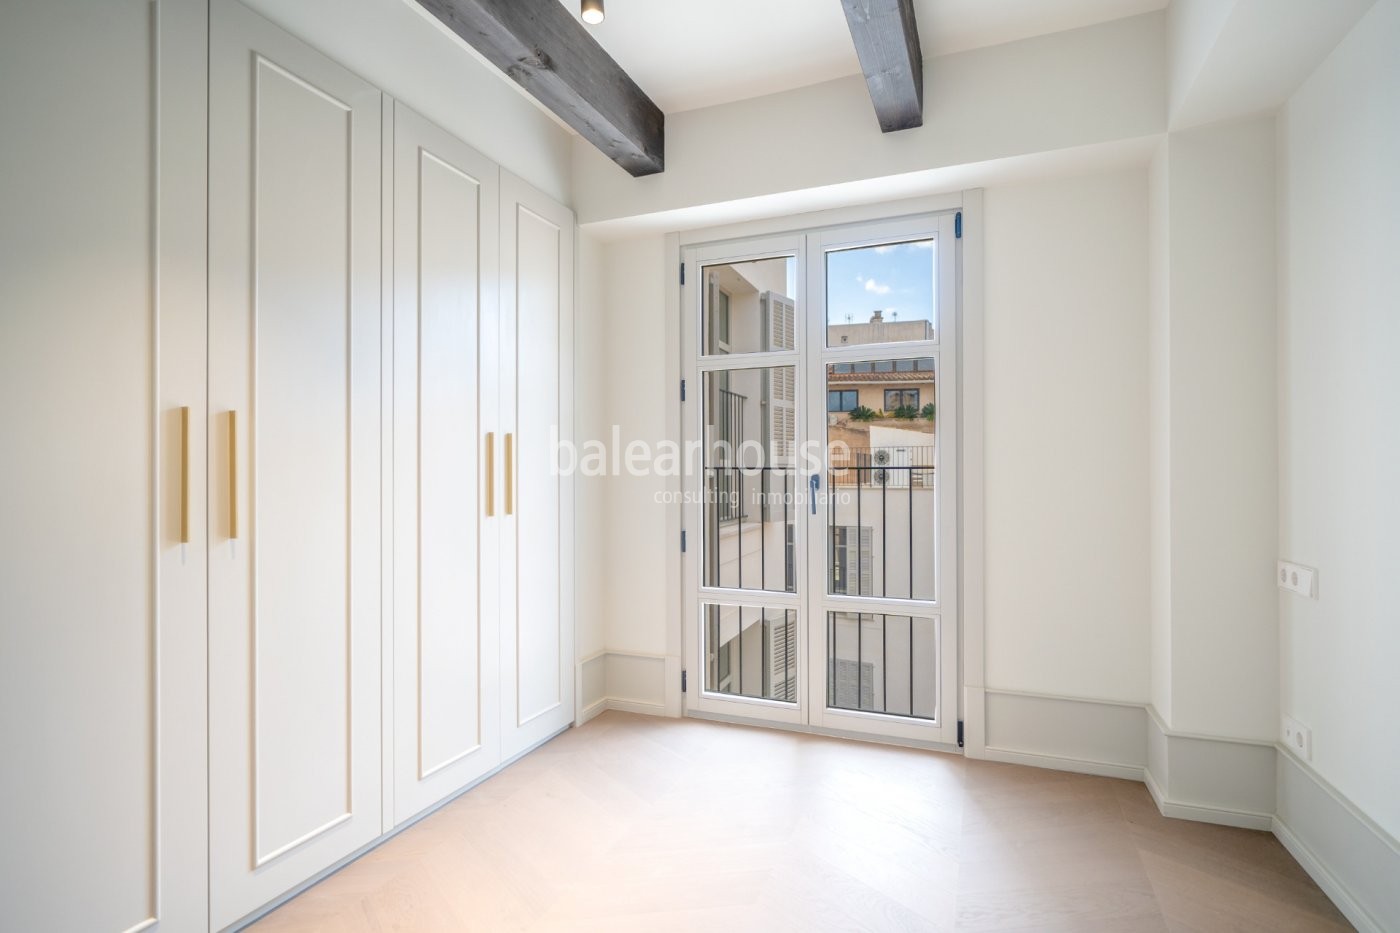 Excellent newly built penthouse with an elegant light-filled design in the historic centre of Palma.